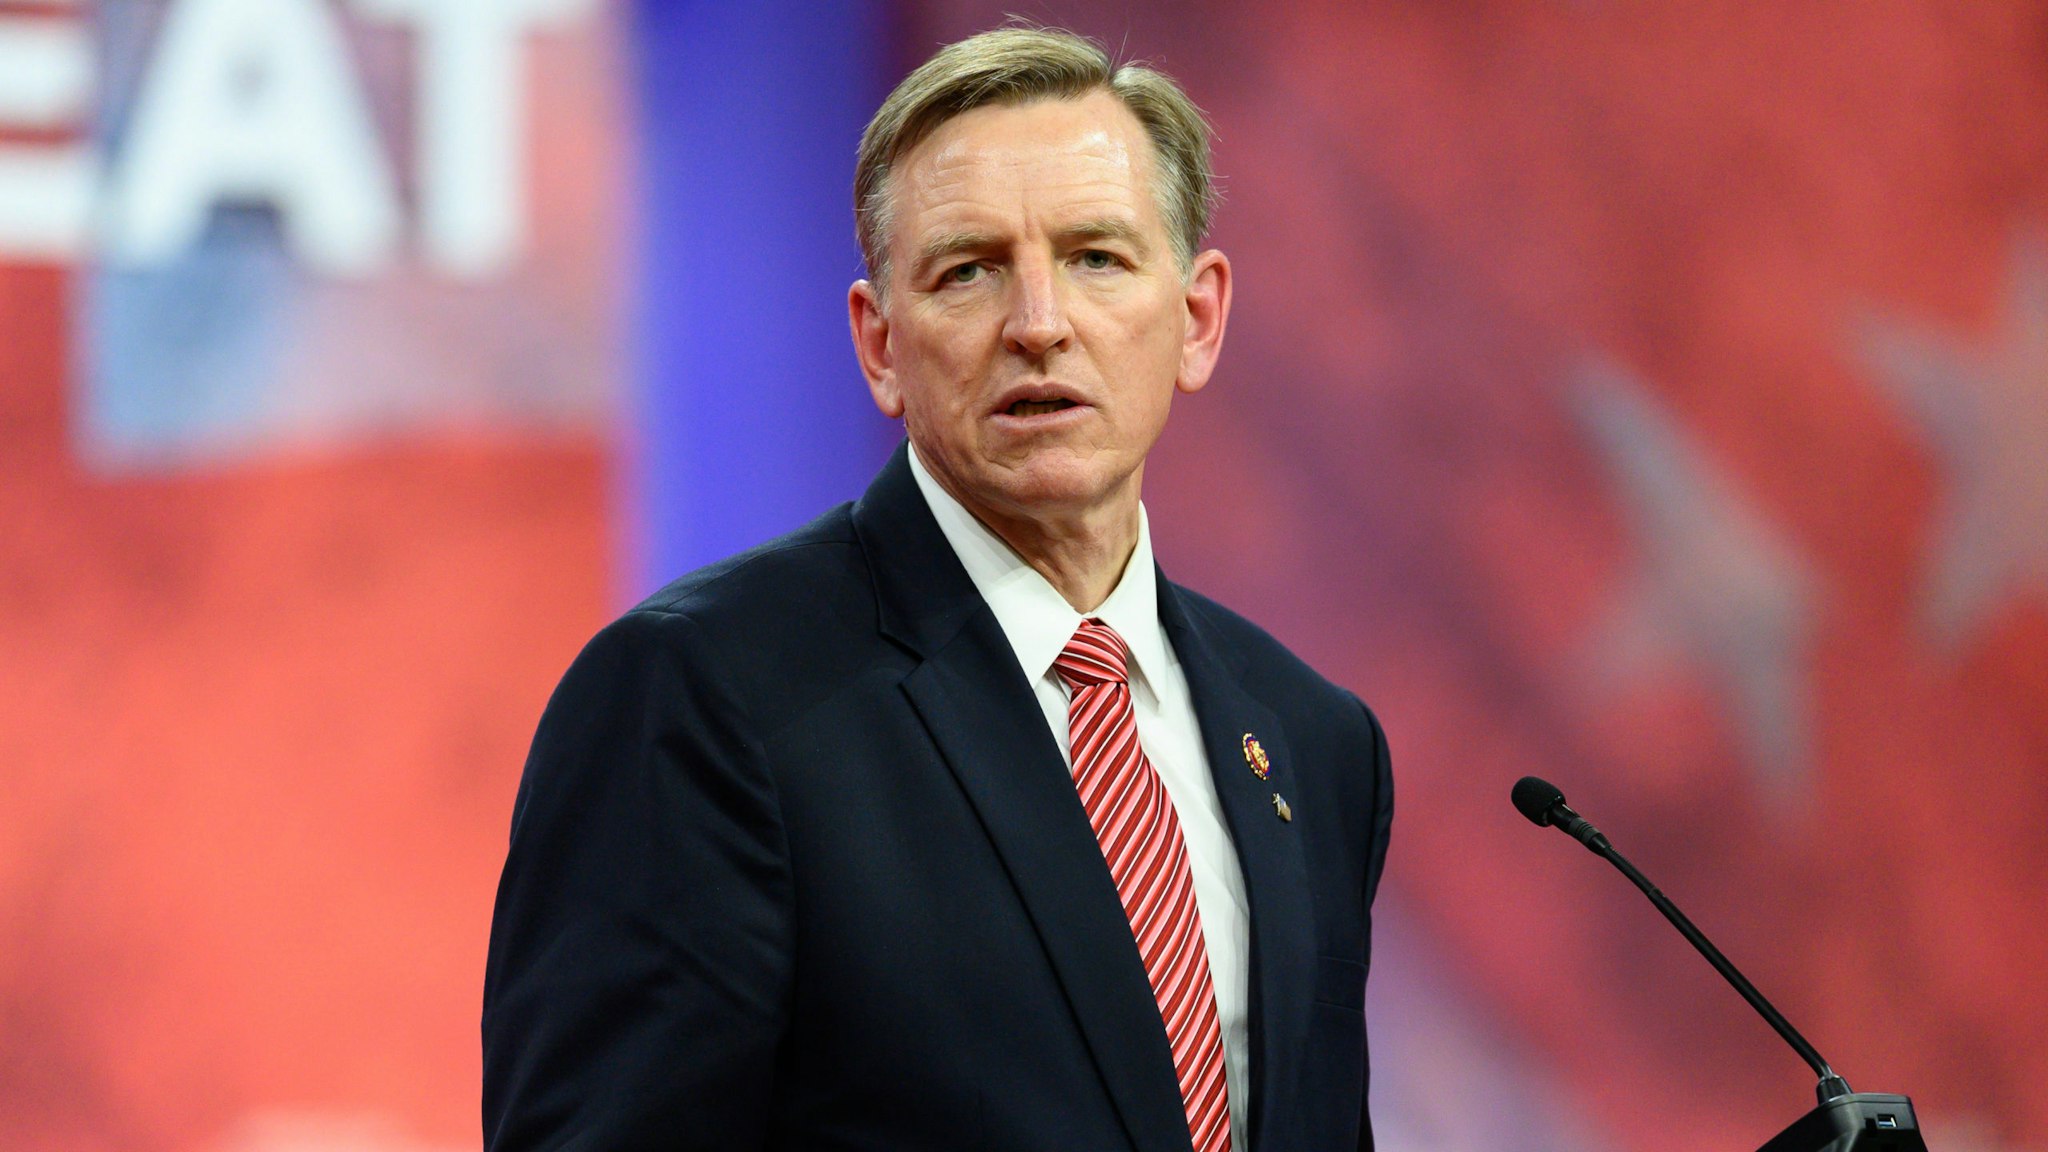 OXON HILL, MD, UNITED STATES - 2019/02/28: U.S. Representative Paul Gosar (R-AZ) seen speaking during the American Conservative Union's Conservative Political Action Conference (CPAC) at the Gaylord National Resort &amp; Convention Center in Oxon Hill, MD.